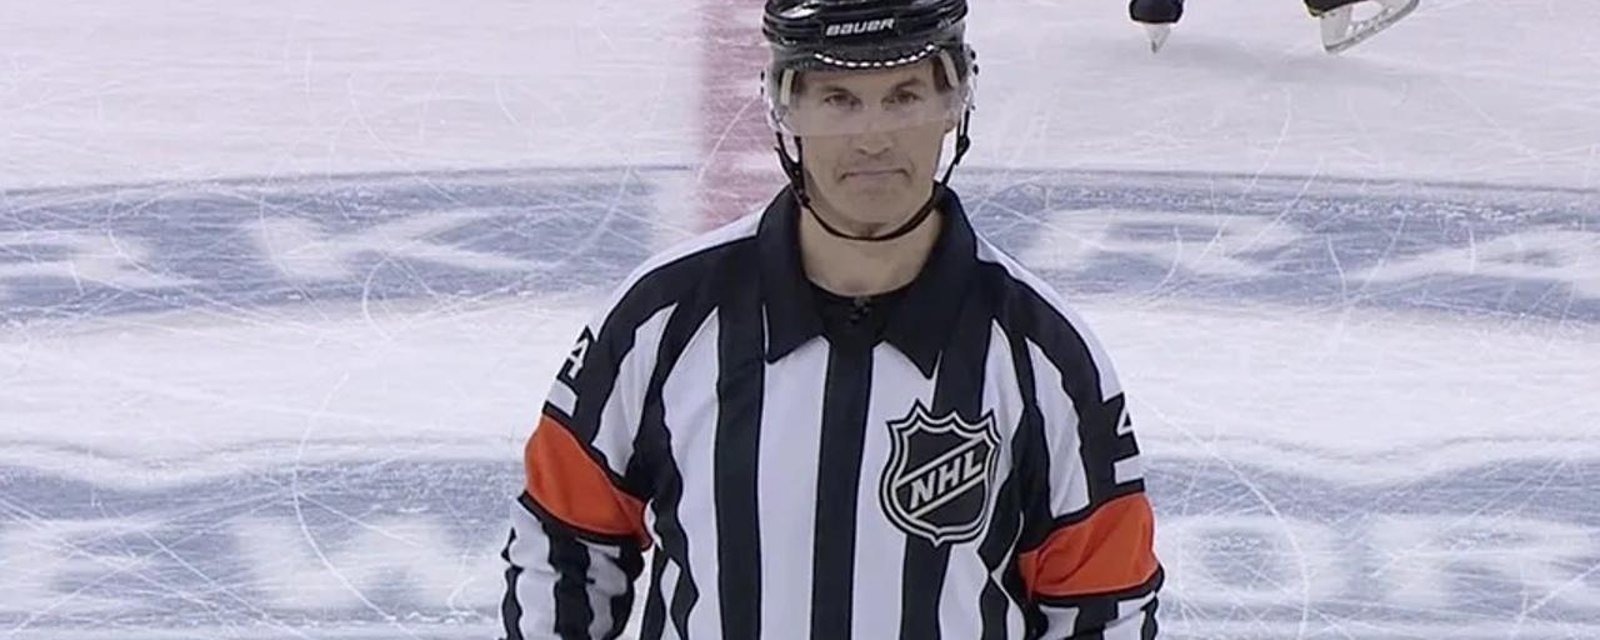 Referee Wes McCauley once again at the center of some controversy